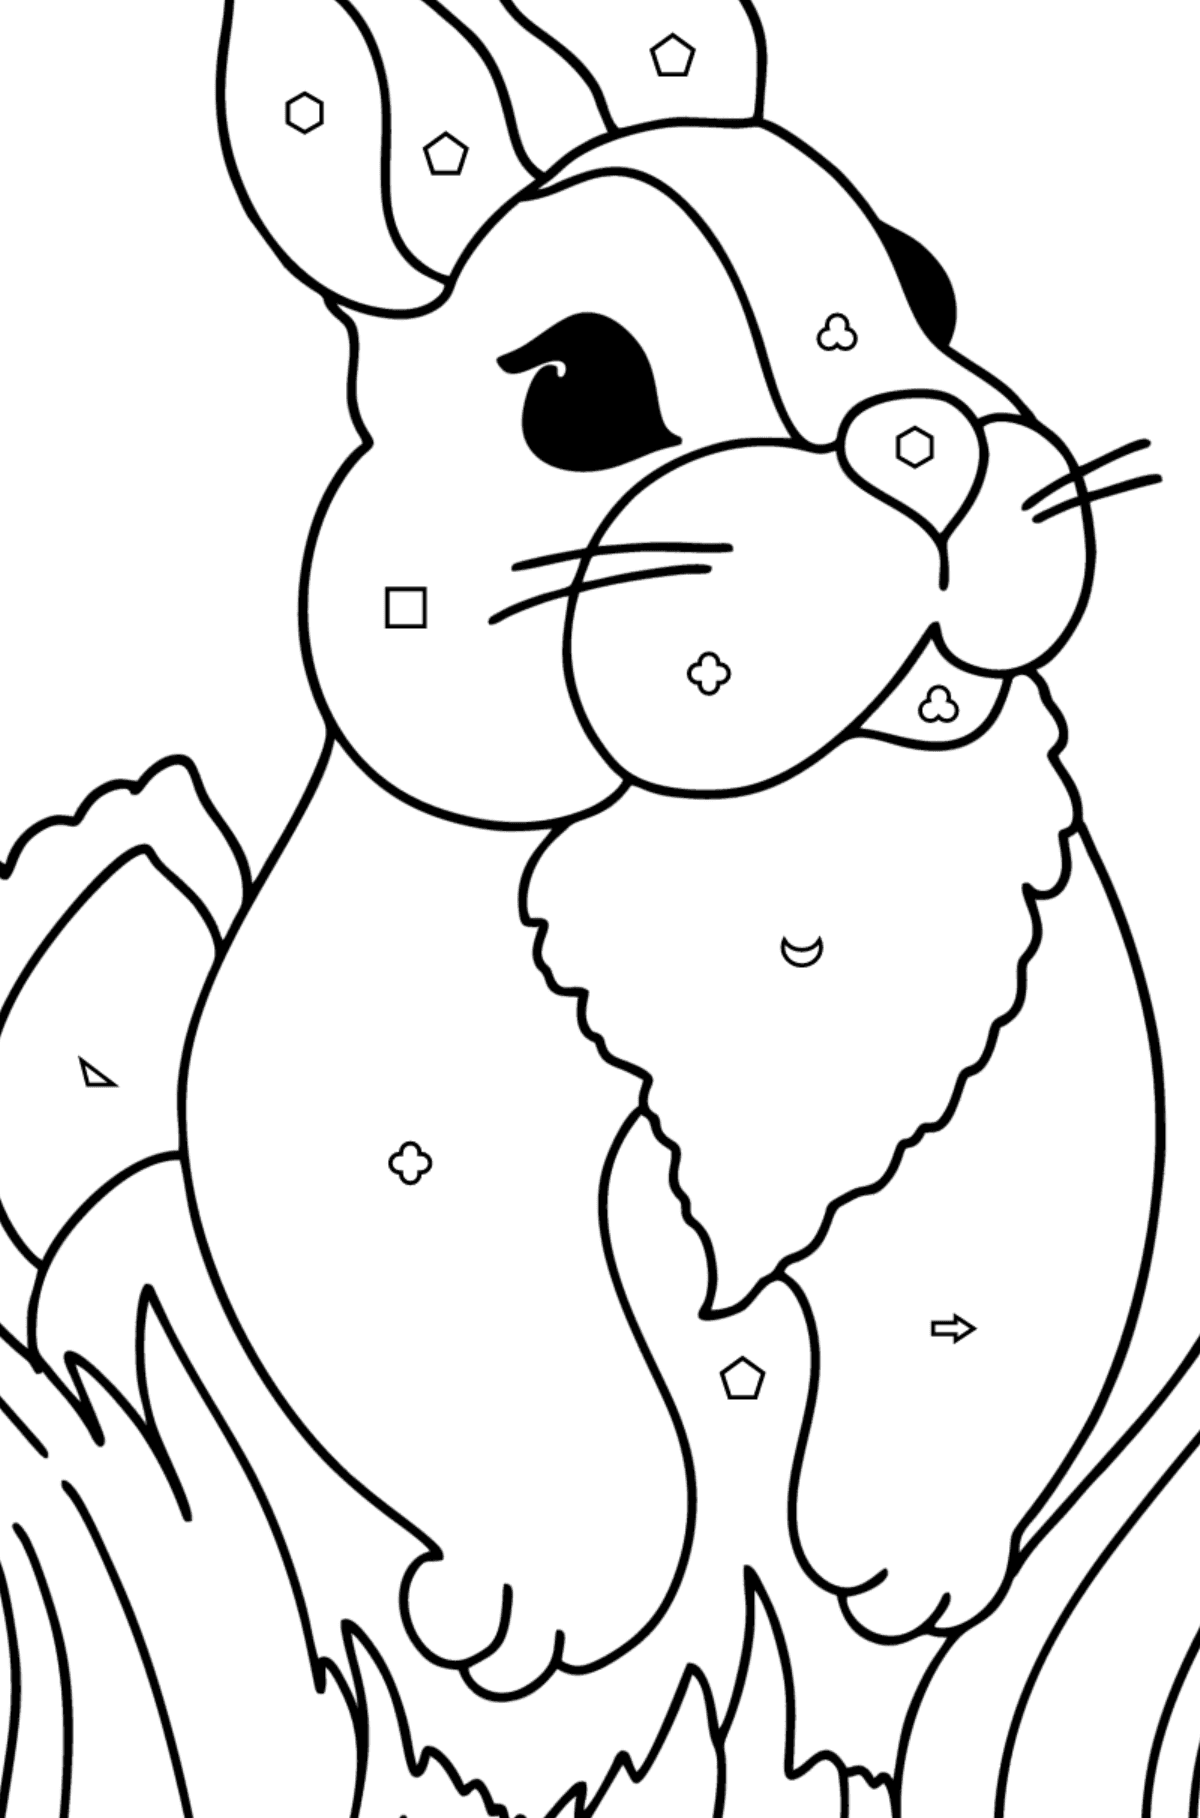 Fluffy Bunny Coloring page - Coloring by Geometric Shapes for Kids